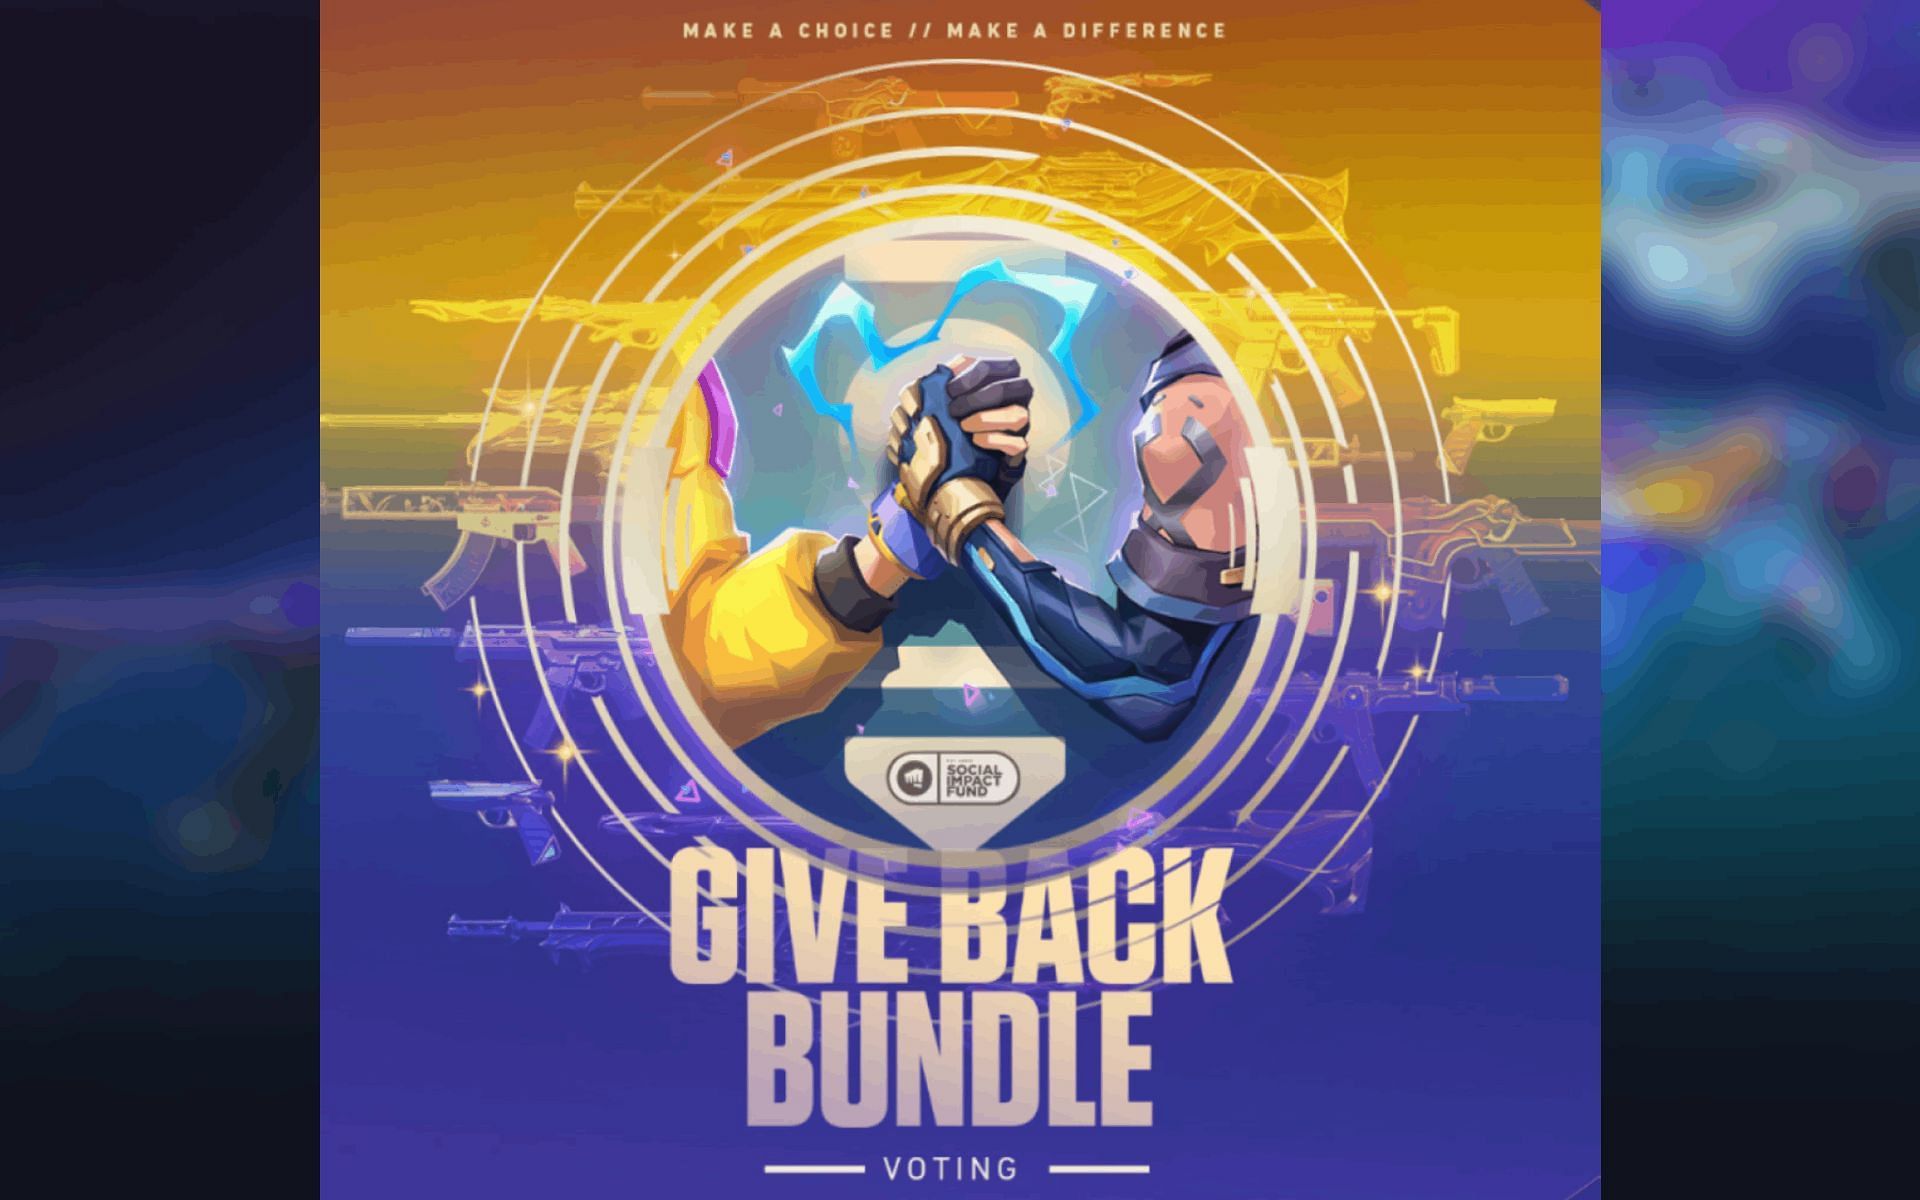 Riot Games has brought back the Give Back Bundle initiative and the voting has begun on October 21st (Image via Riot Games) )